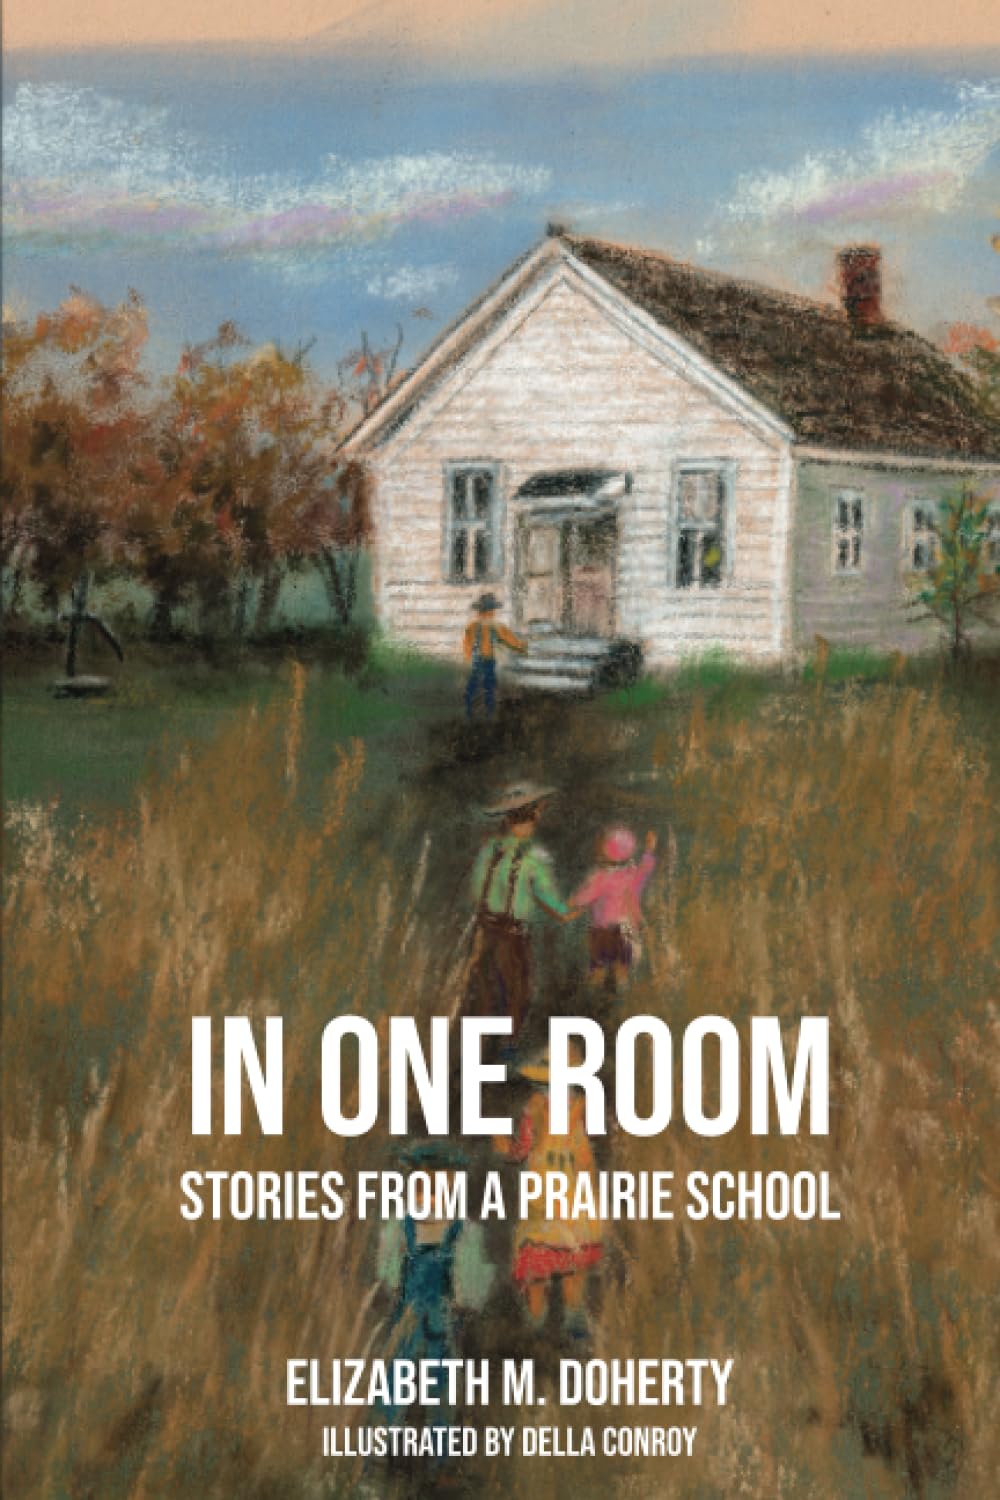 Captivating Memoir "In One Room" by Elizabeth Doherty Unveils a Journey of Nostalgia and Education